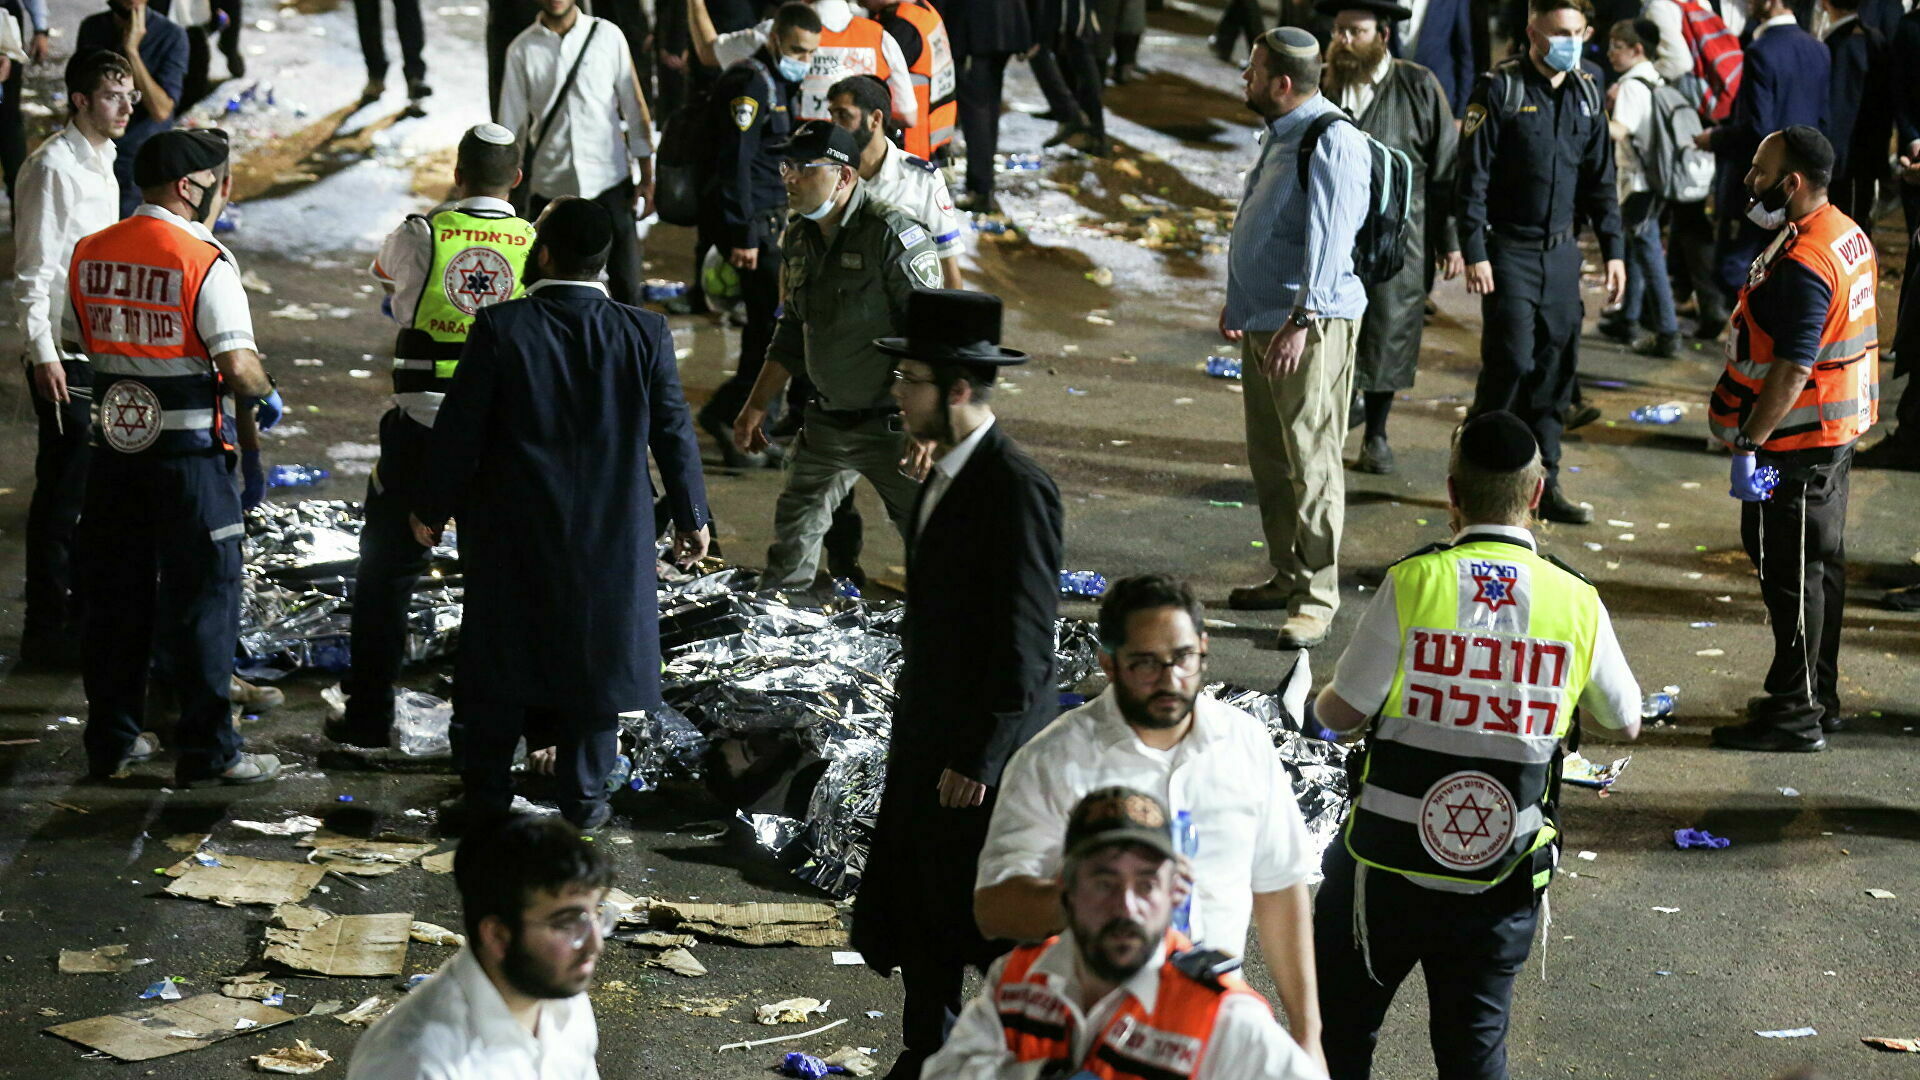 44 people were killed during a religious holiday in Israel